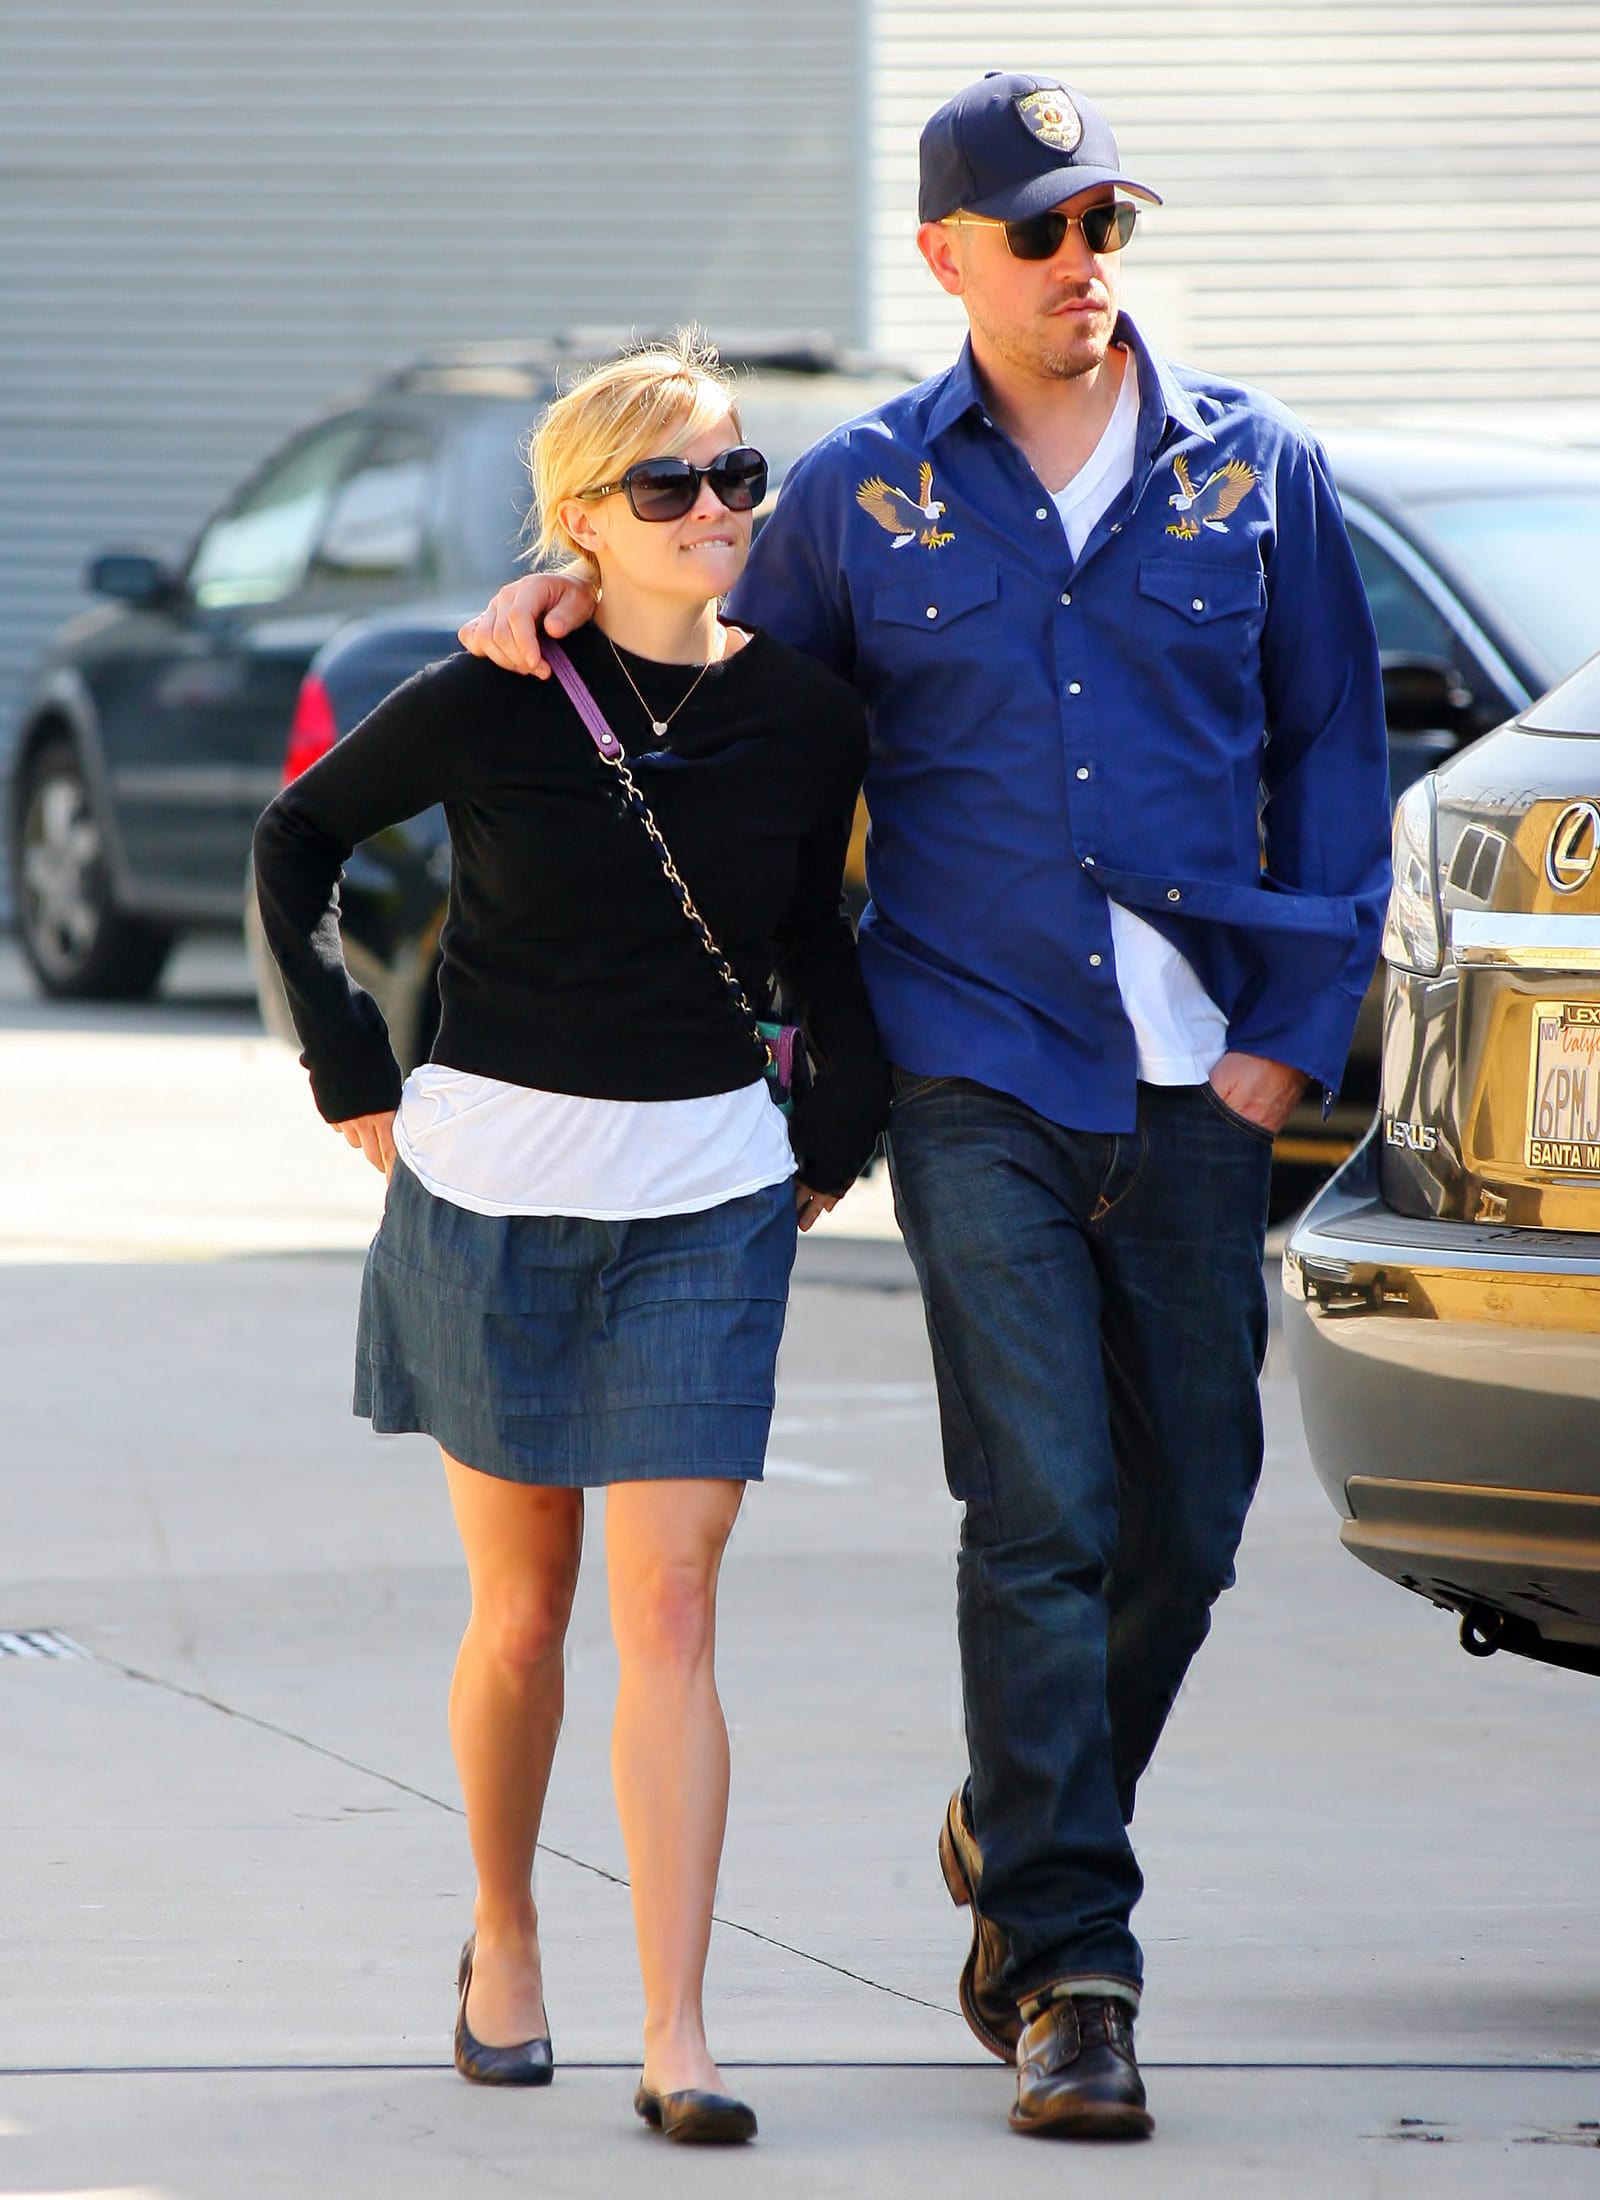 Toth divorce jim reese witherspoon Reese Witherspoon,